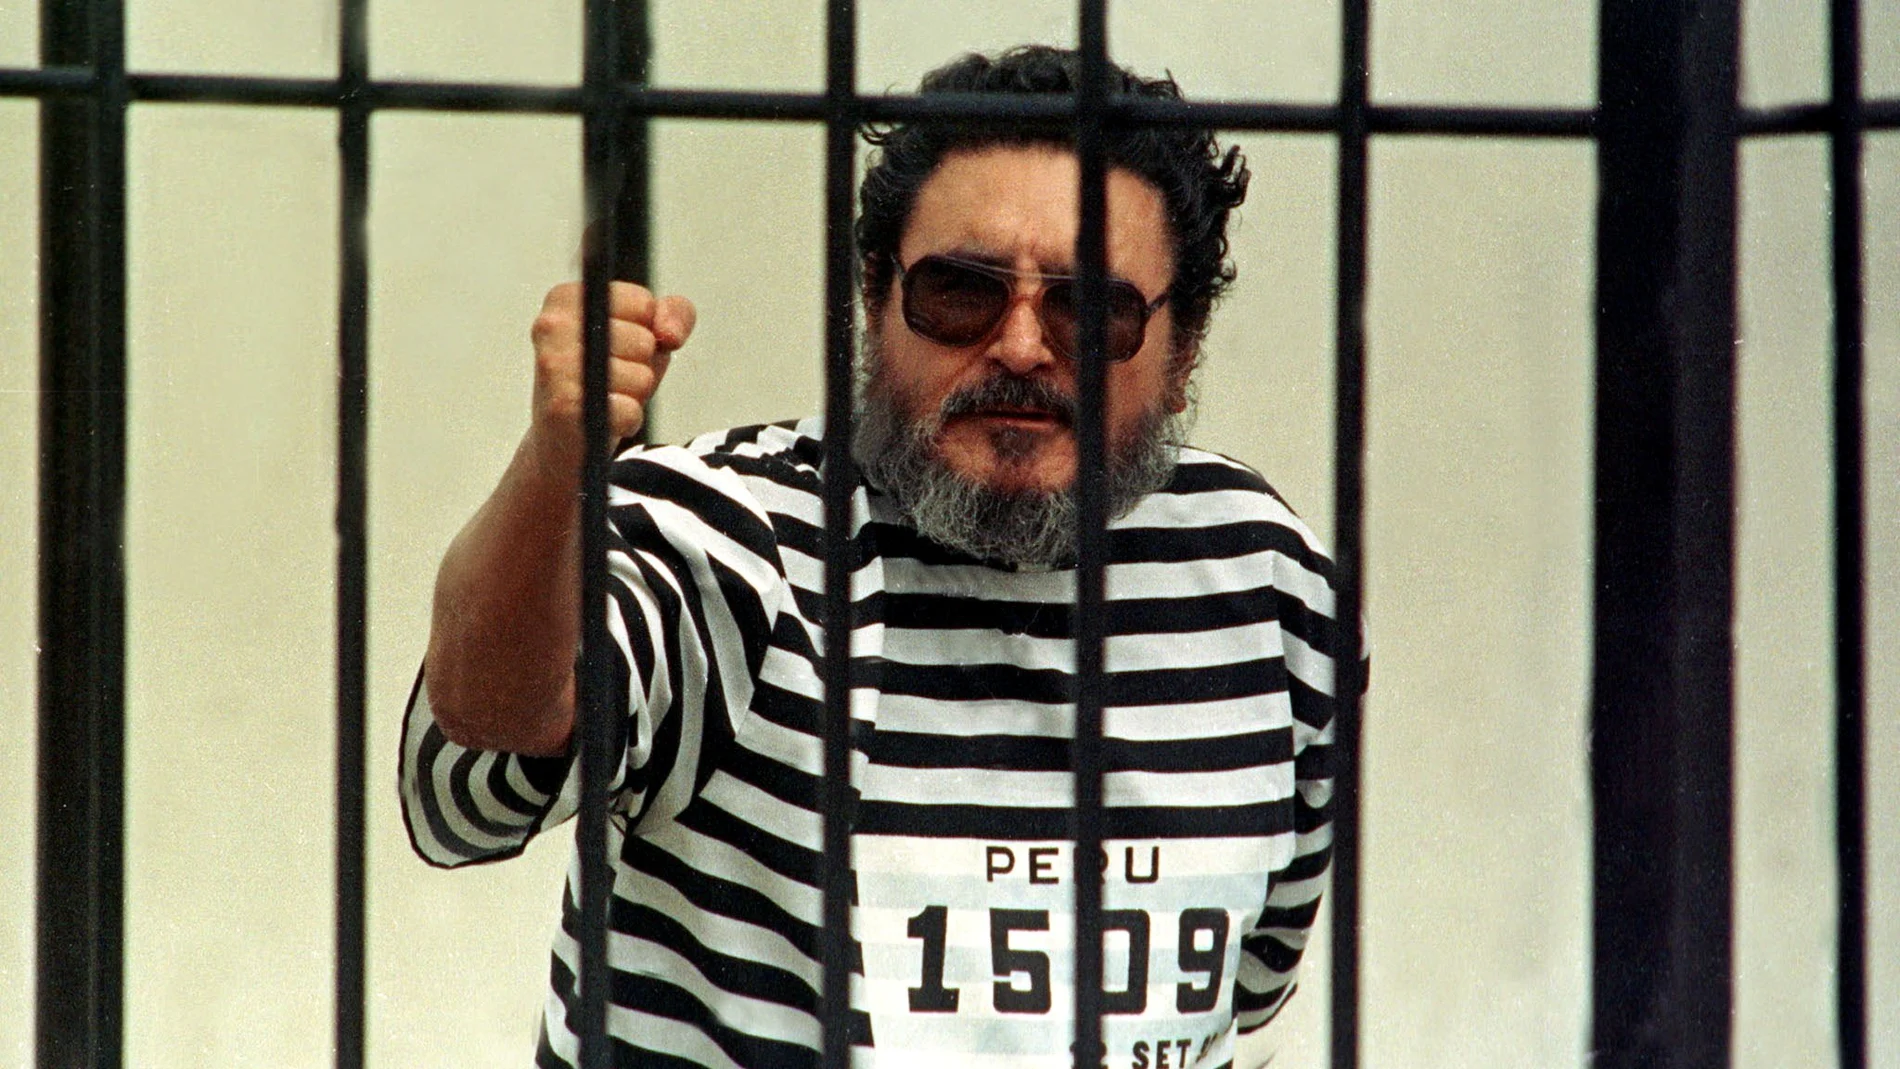 FILE PHOTO: Shining Path guerrrilla leader Abimael Guzman, seen in a jail after his capture in Peru, on September 24, 1992. REUTERS/Anibal Solimano/File Photo